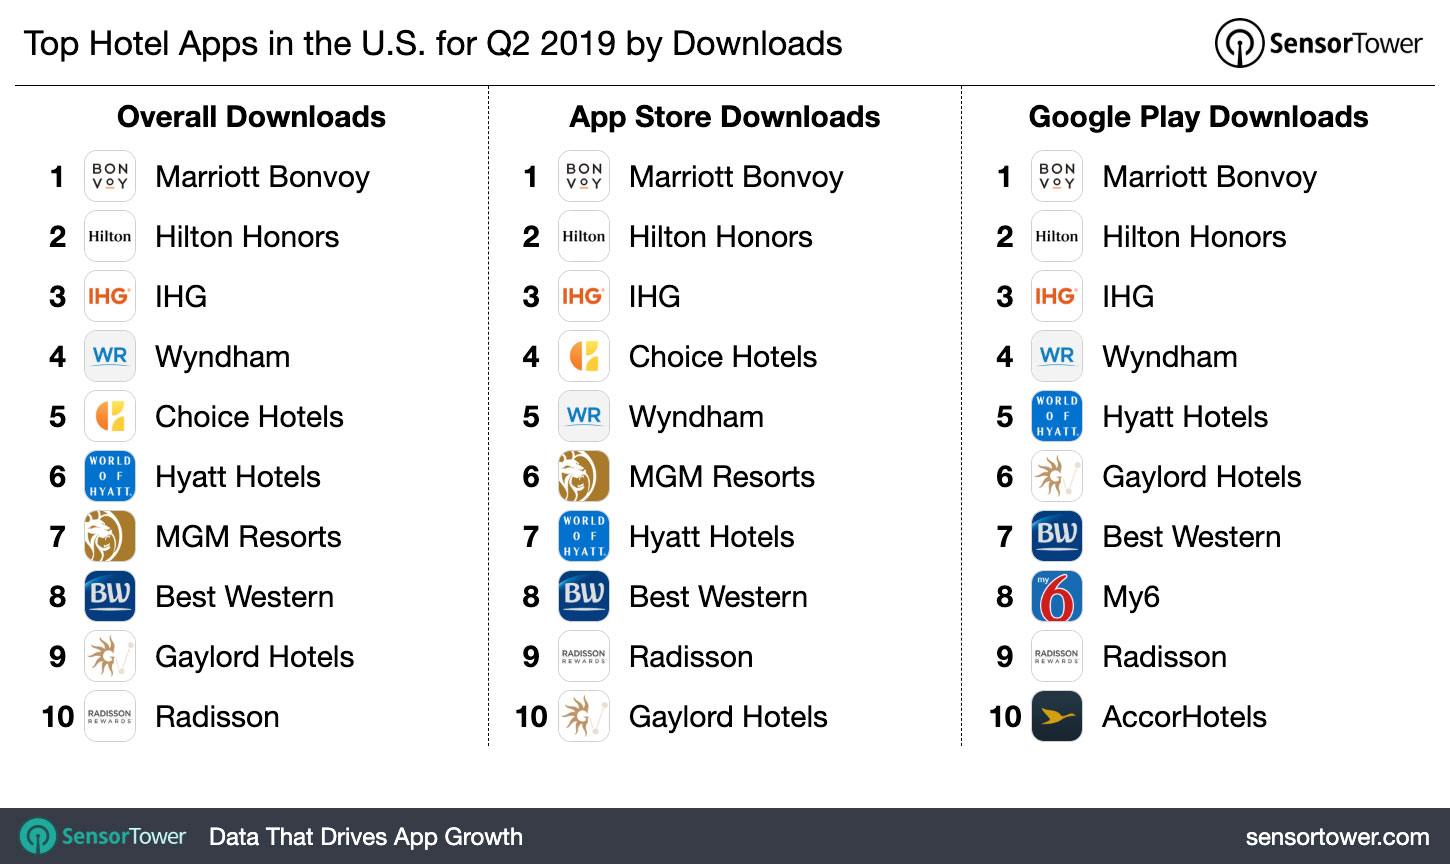 Top Hotel Apps in the U.S. for Q2 2019 by Downloads